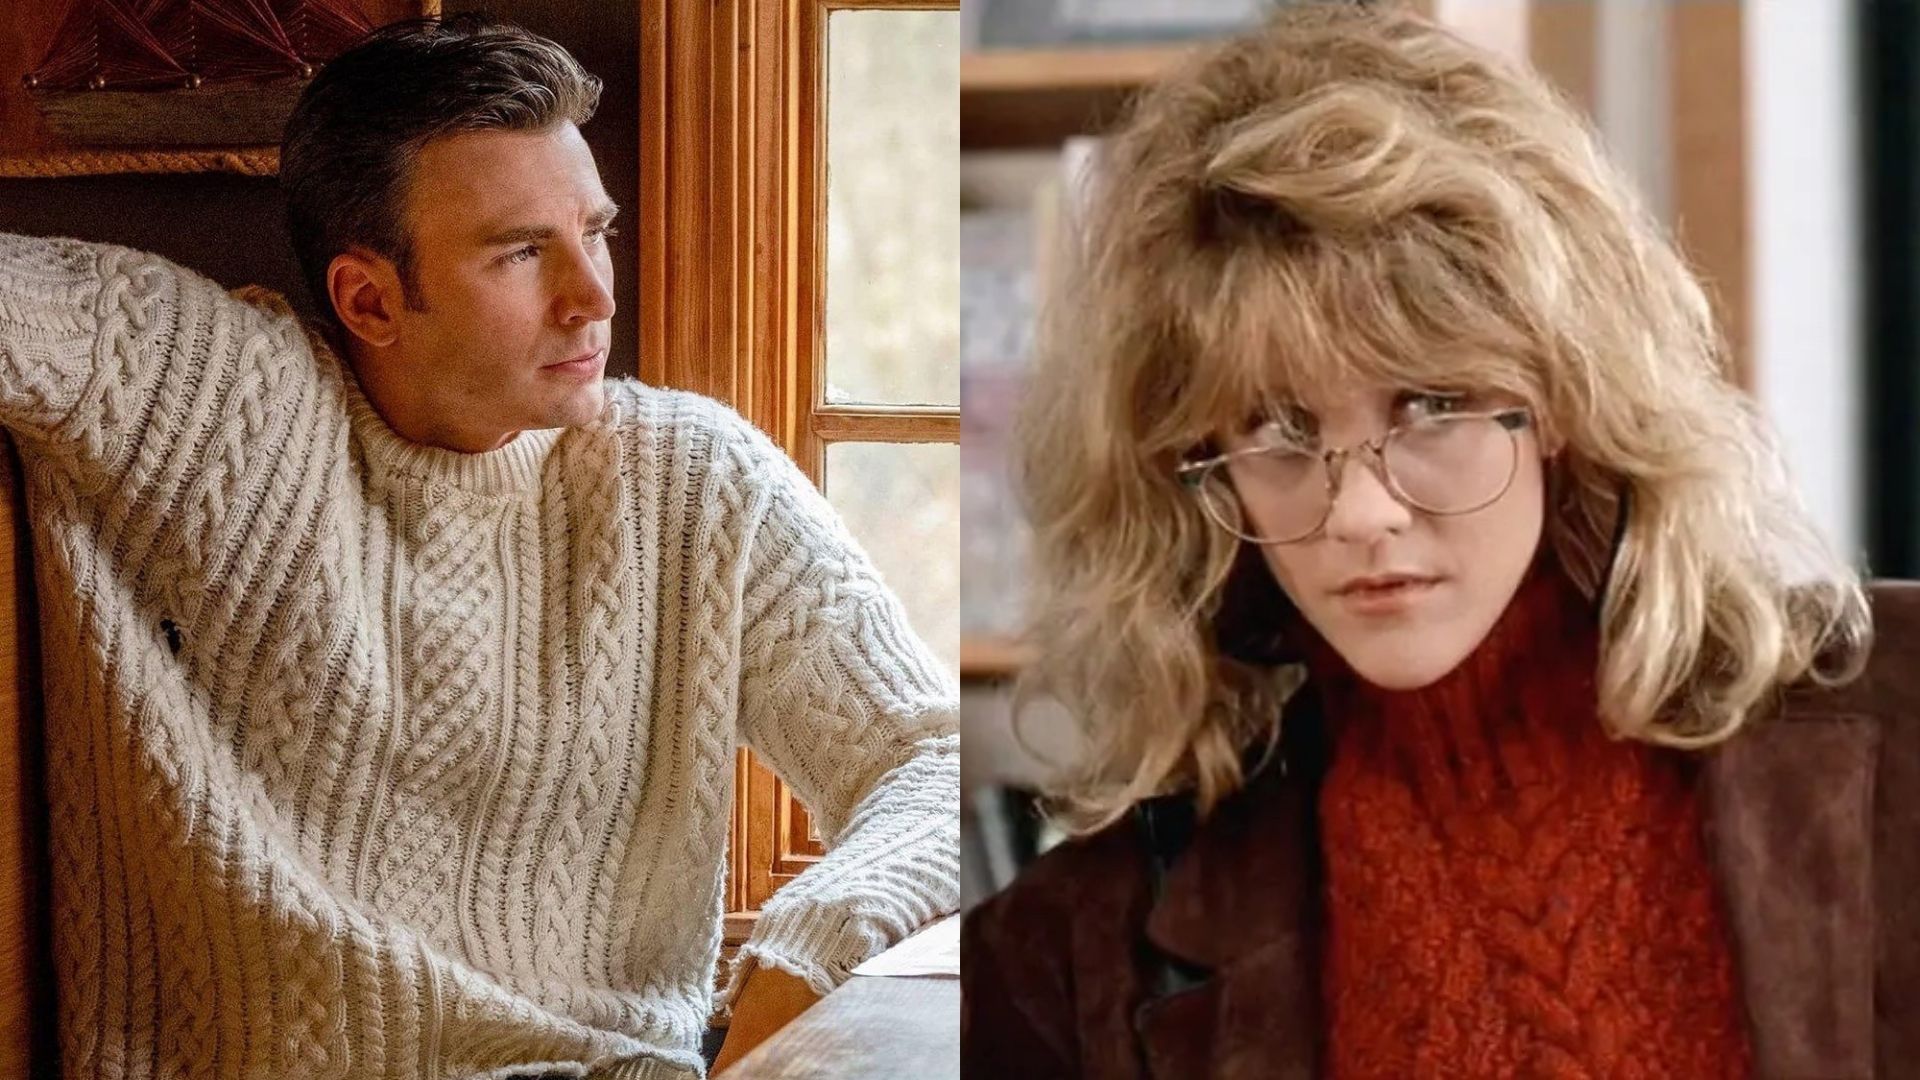 We Tracked Down 7 Iconic Movie Jumpers For You To Rug Up In, Including *That* Chris Evans One